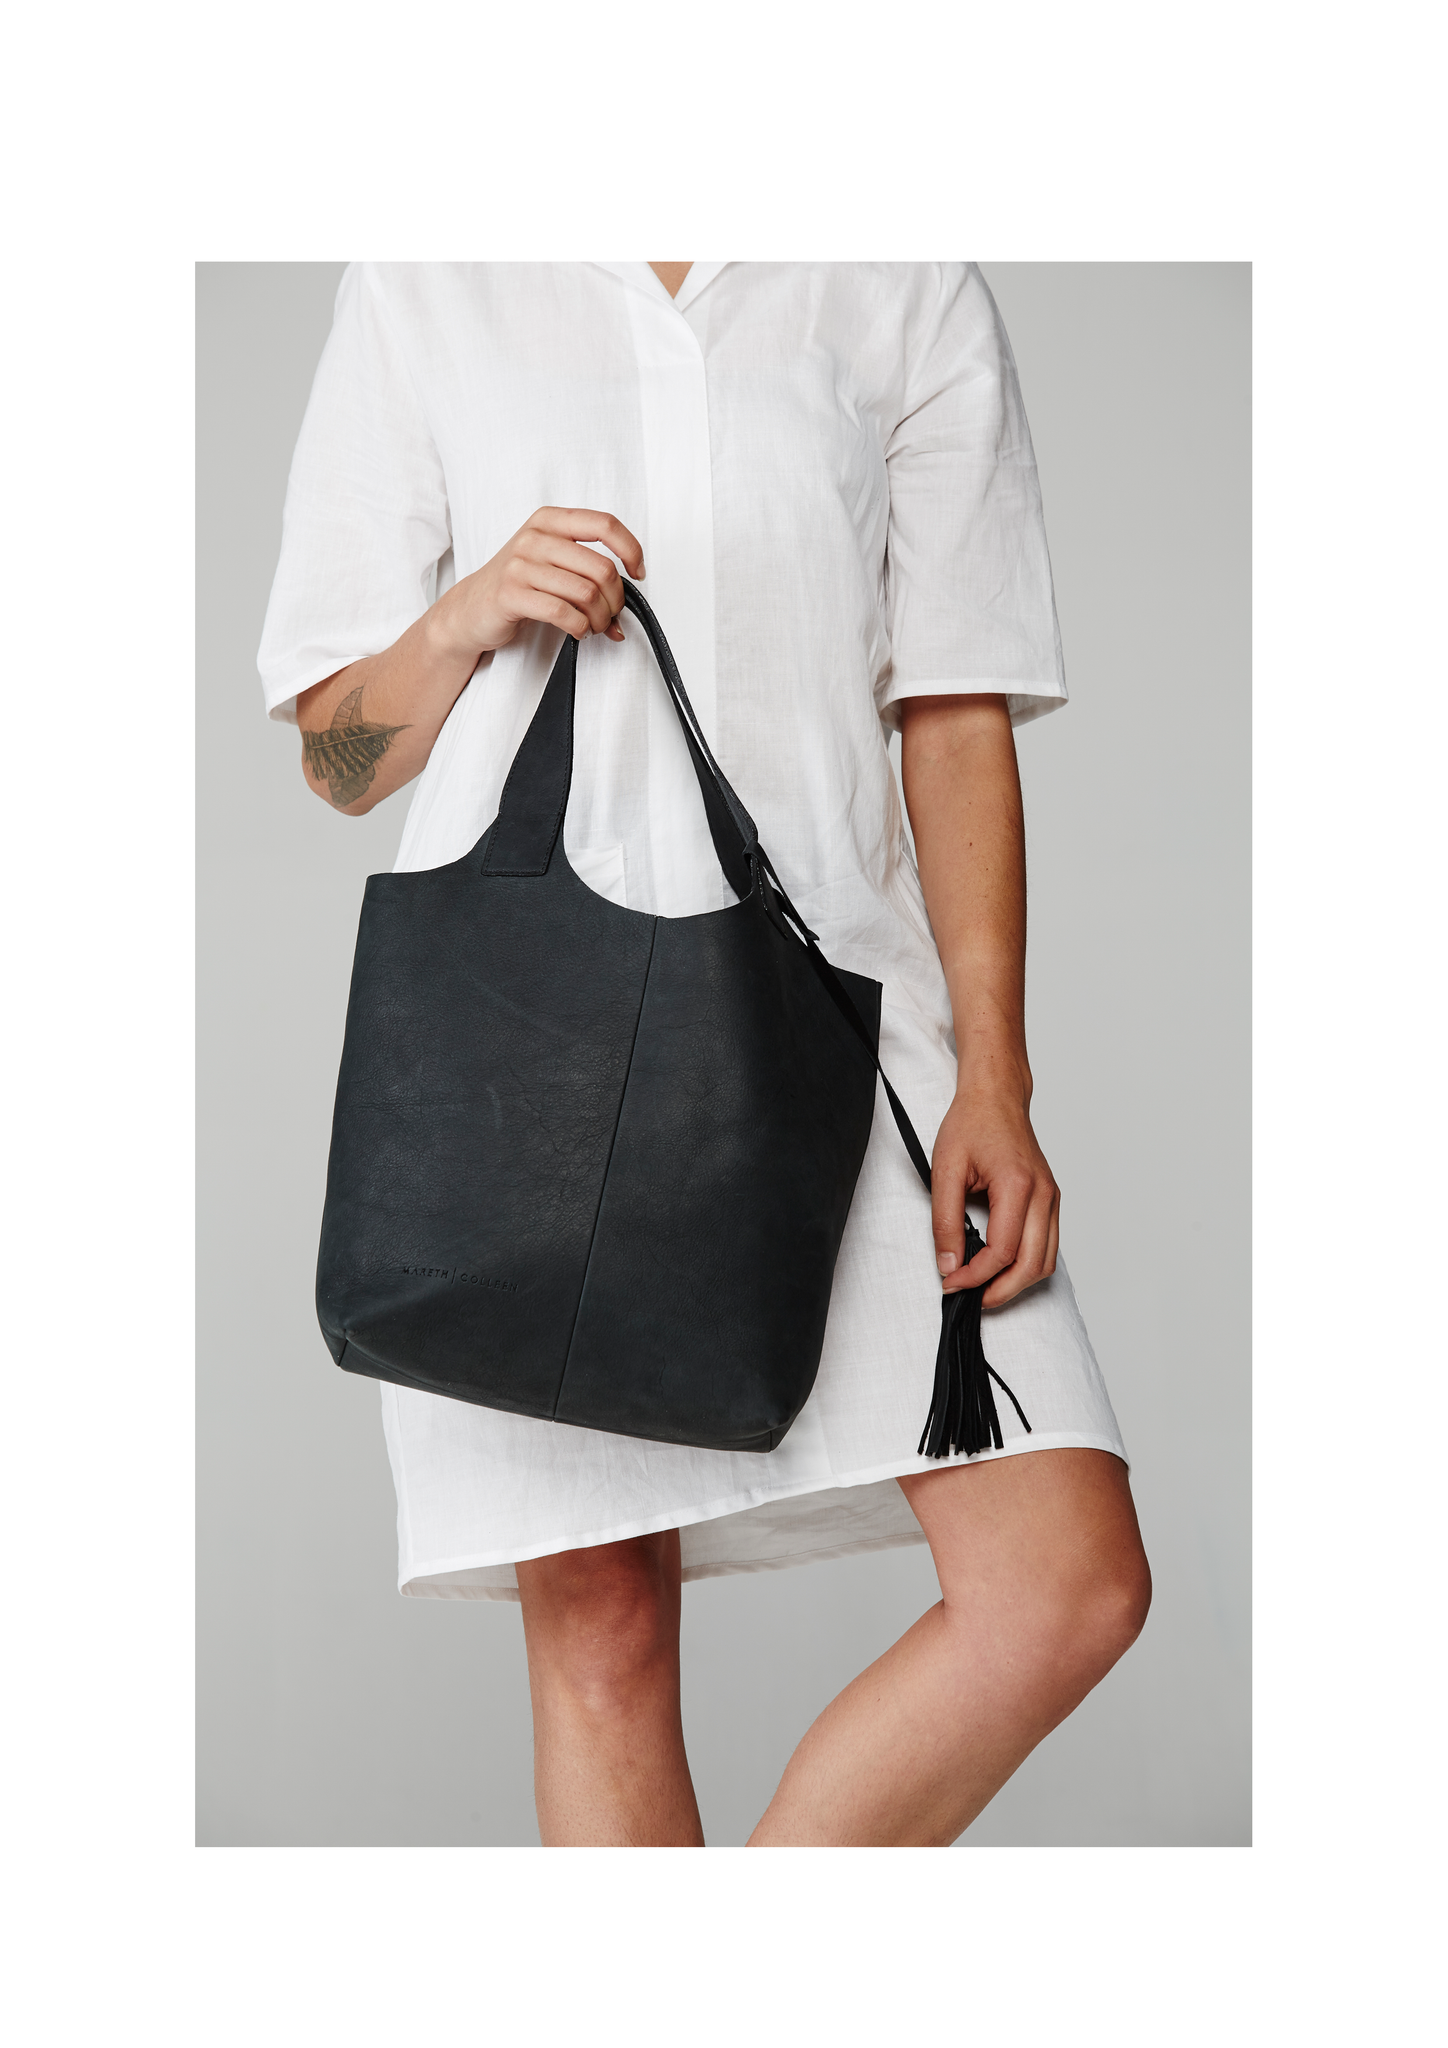 Cape Town, MARETHCOLLEEN, Shop, Shop Online, Local Design, Tote, Leather, Handbags, Leather Bag, Leather Tote 